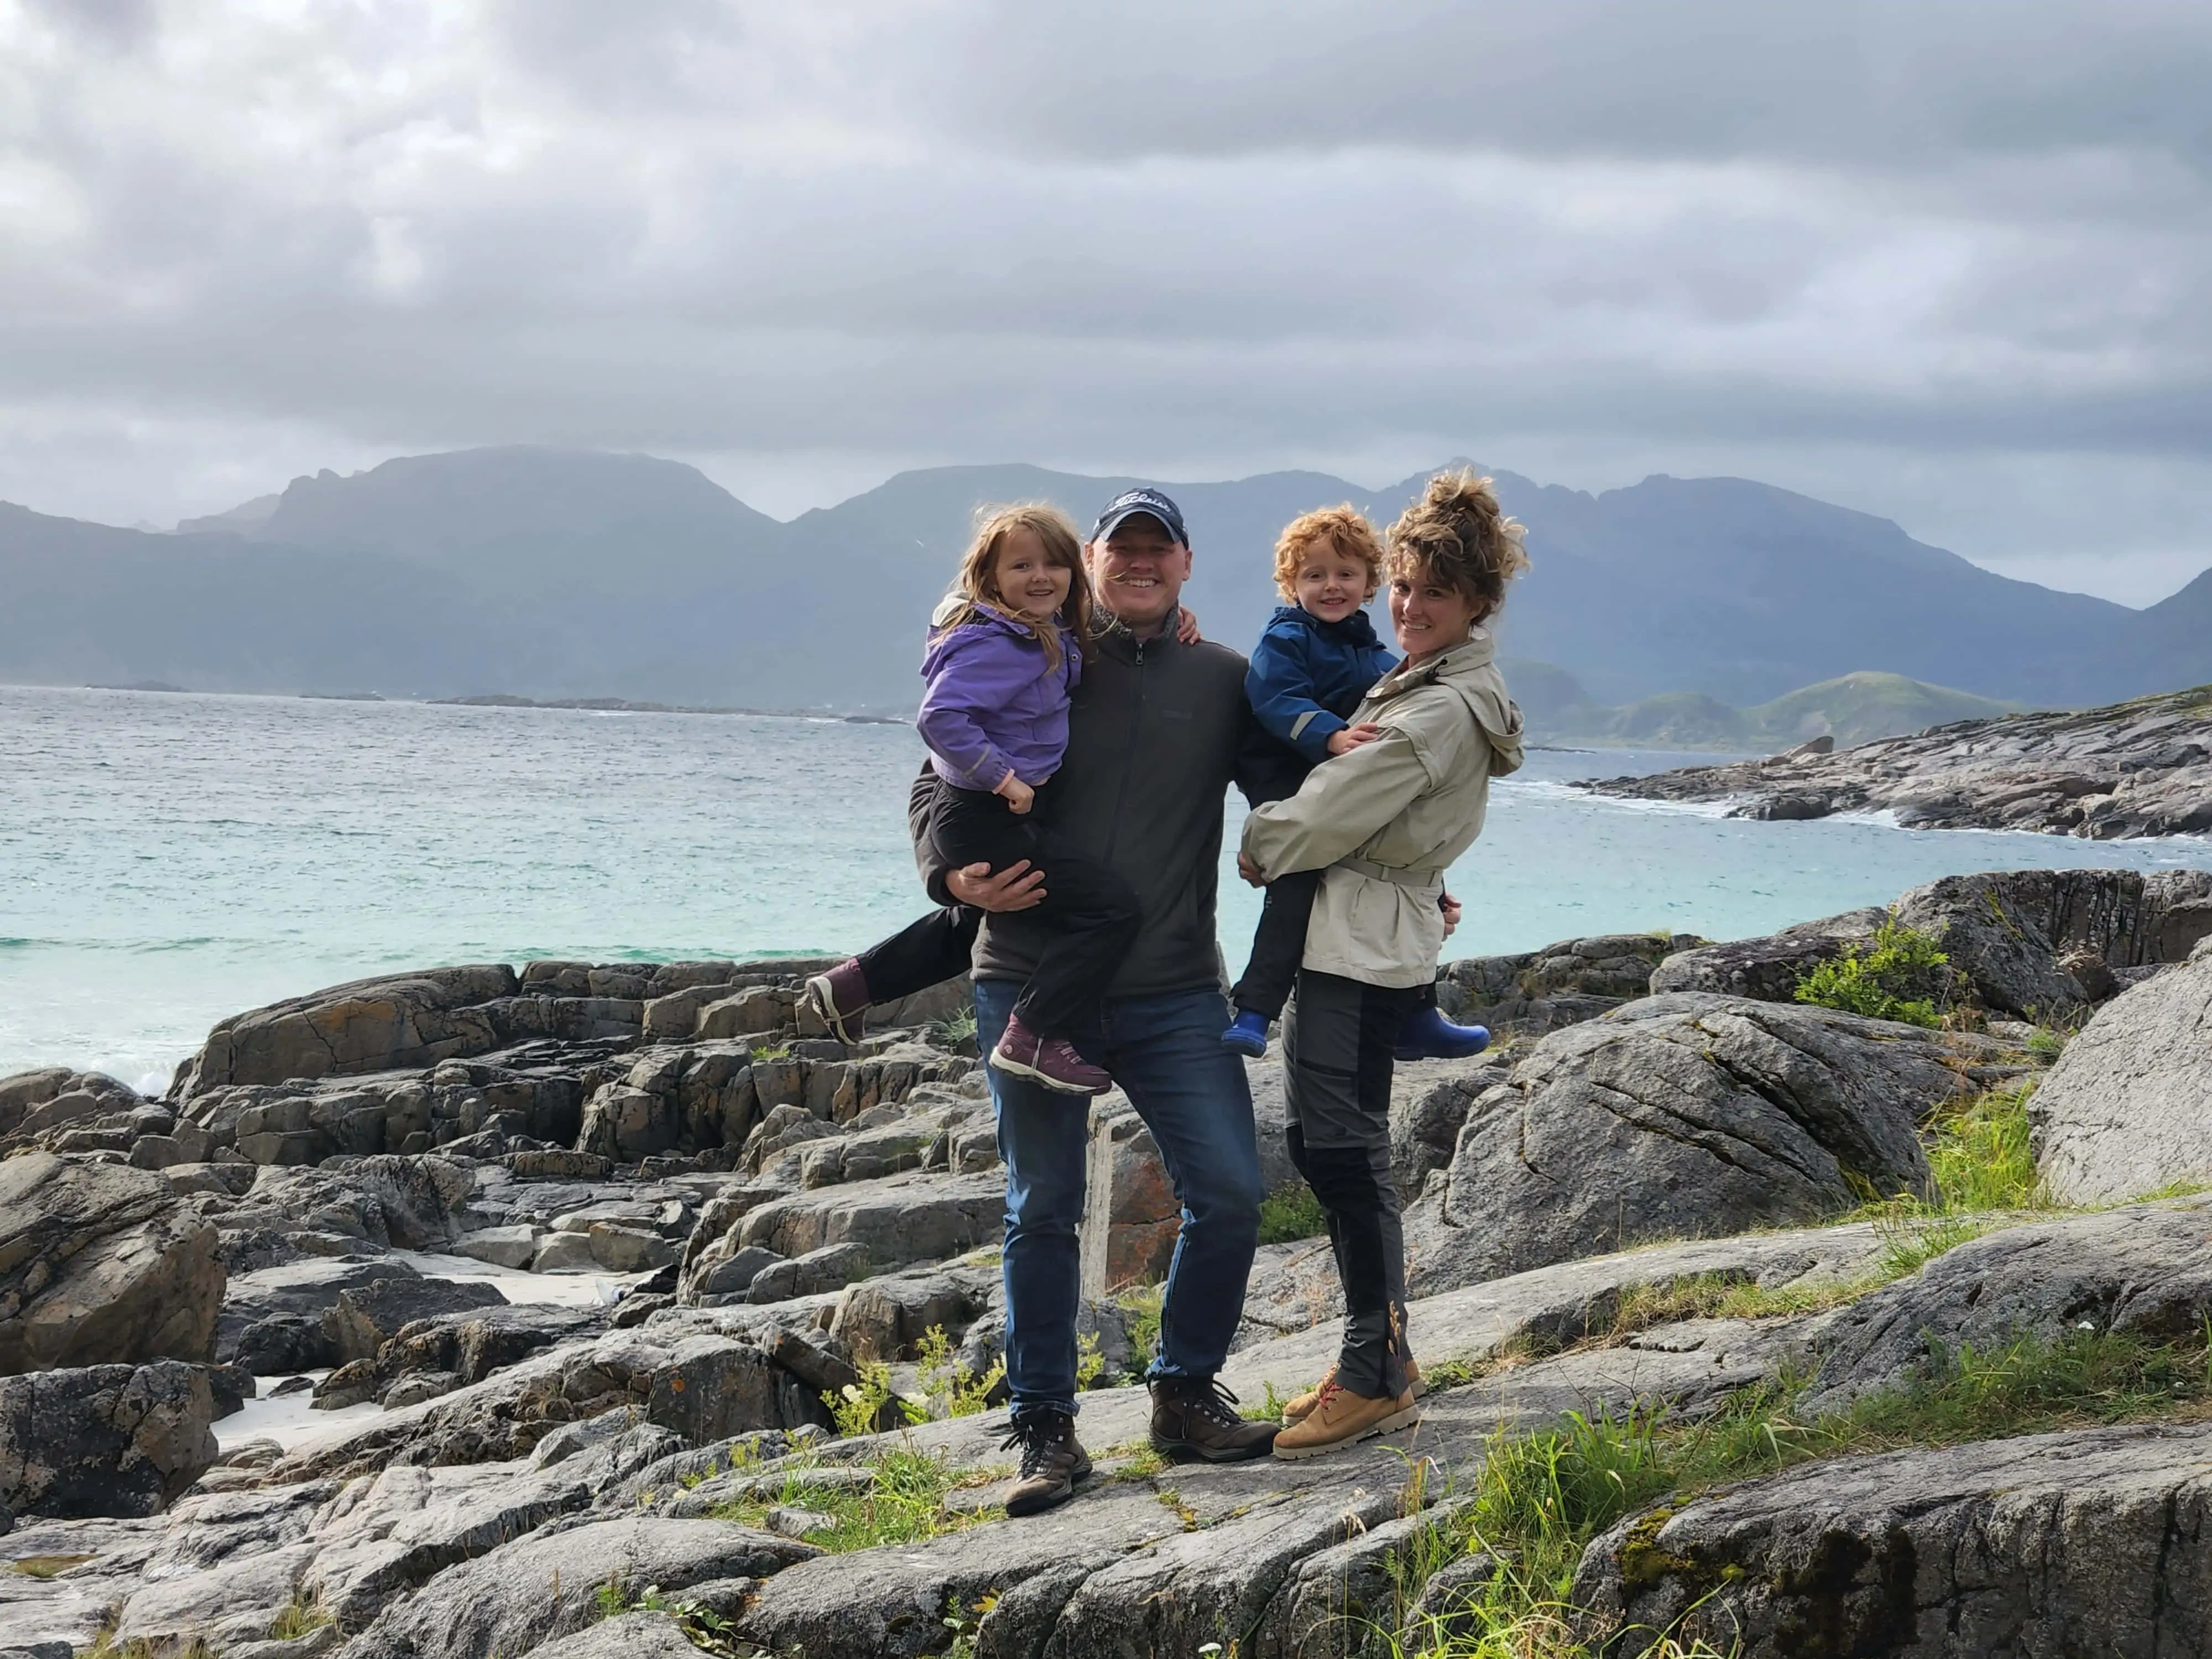 Makeway Co-Founder Josh, with his family on a rocky coast in Norway.